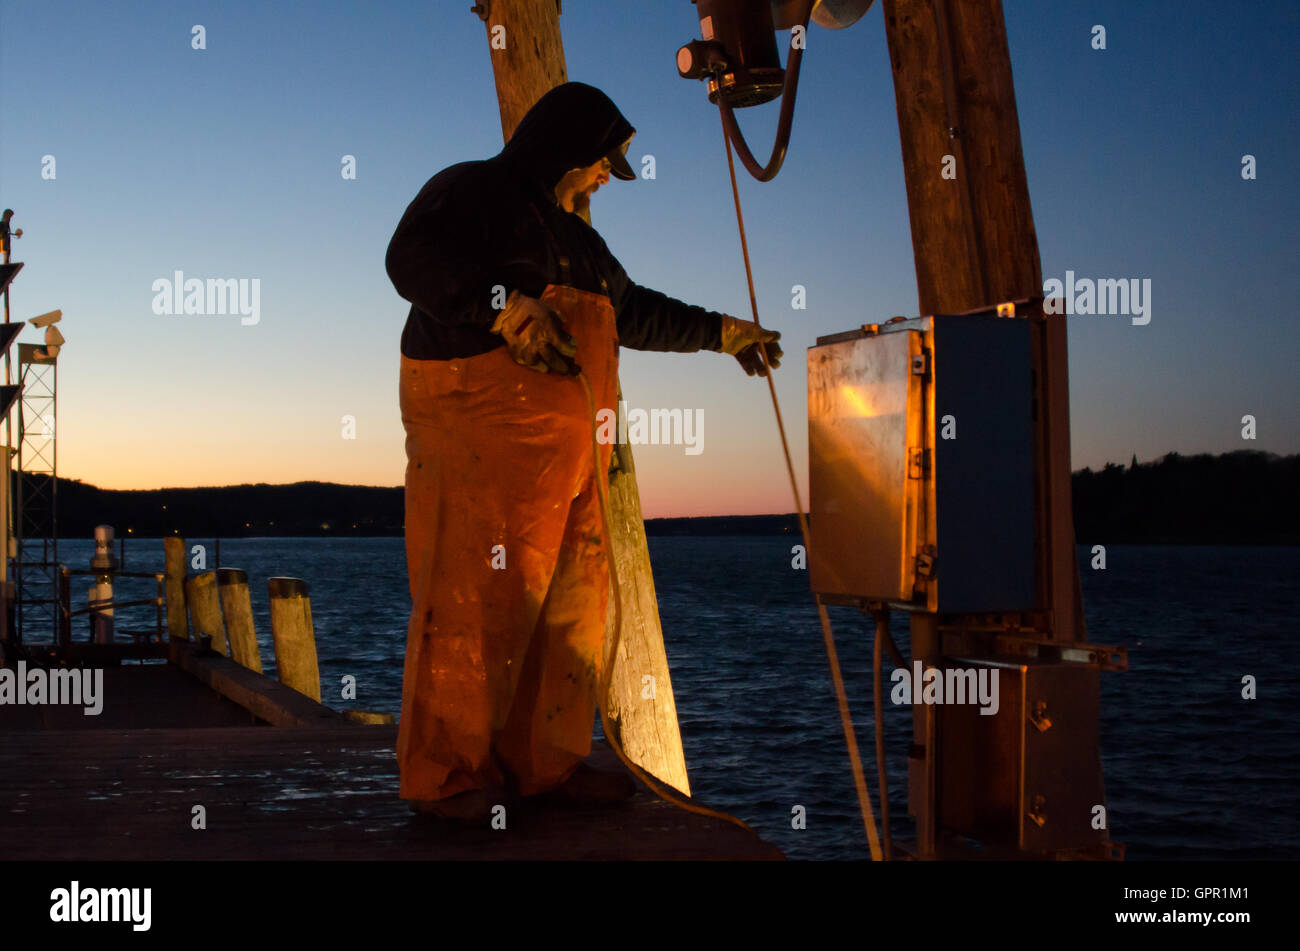 A fisherman unloads his boat at the Town Dock on a cold December evening in Bar Harbor, Maine. Stock Photo